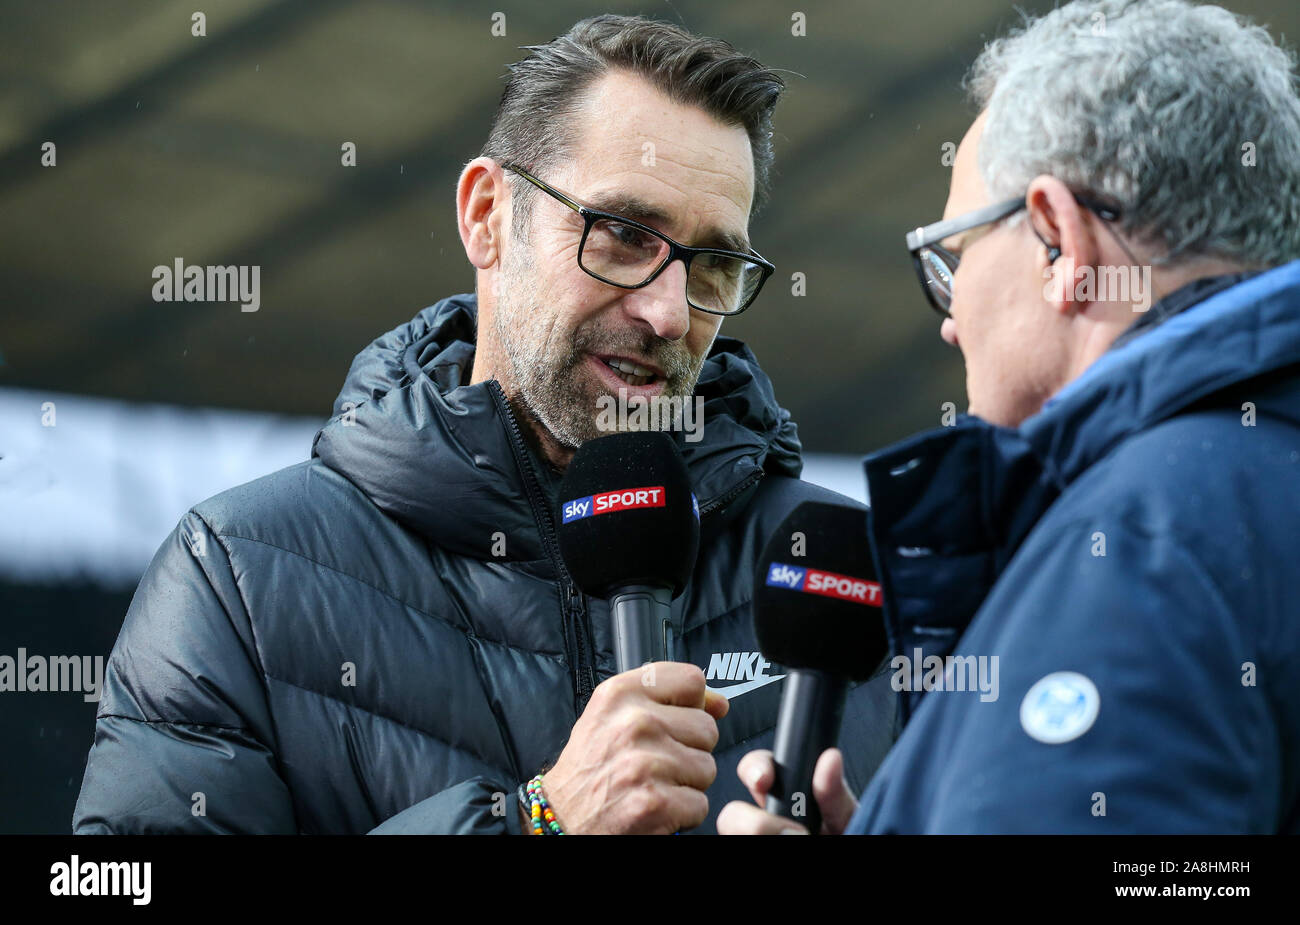 Munich, Deutschland. 09th Nov, 2019. Berlin, Germany. 09th Nov, 2019. Soccer: Bundesliga, Hertha BSC - RB Leipzig, 11th matchday, Olympiastadion Berlin. Michael Preetz (l), Managing Director of Hertha BSC, speaks in an interview. Credit: Andreas Gora/dpa - IMPORTANT NOTE: In accordance with the requirements of the DFL Deutsche Fußball Liga or the DFB Deutscher Fußball-Bund, it is prohibited to use or have used photographs taken in the stadium and/or the match in the form of sequence images and/or video-like photo sequences./dpa/Alamy Live News Stock Photo